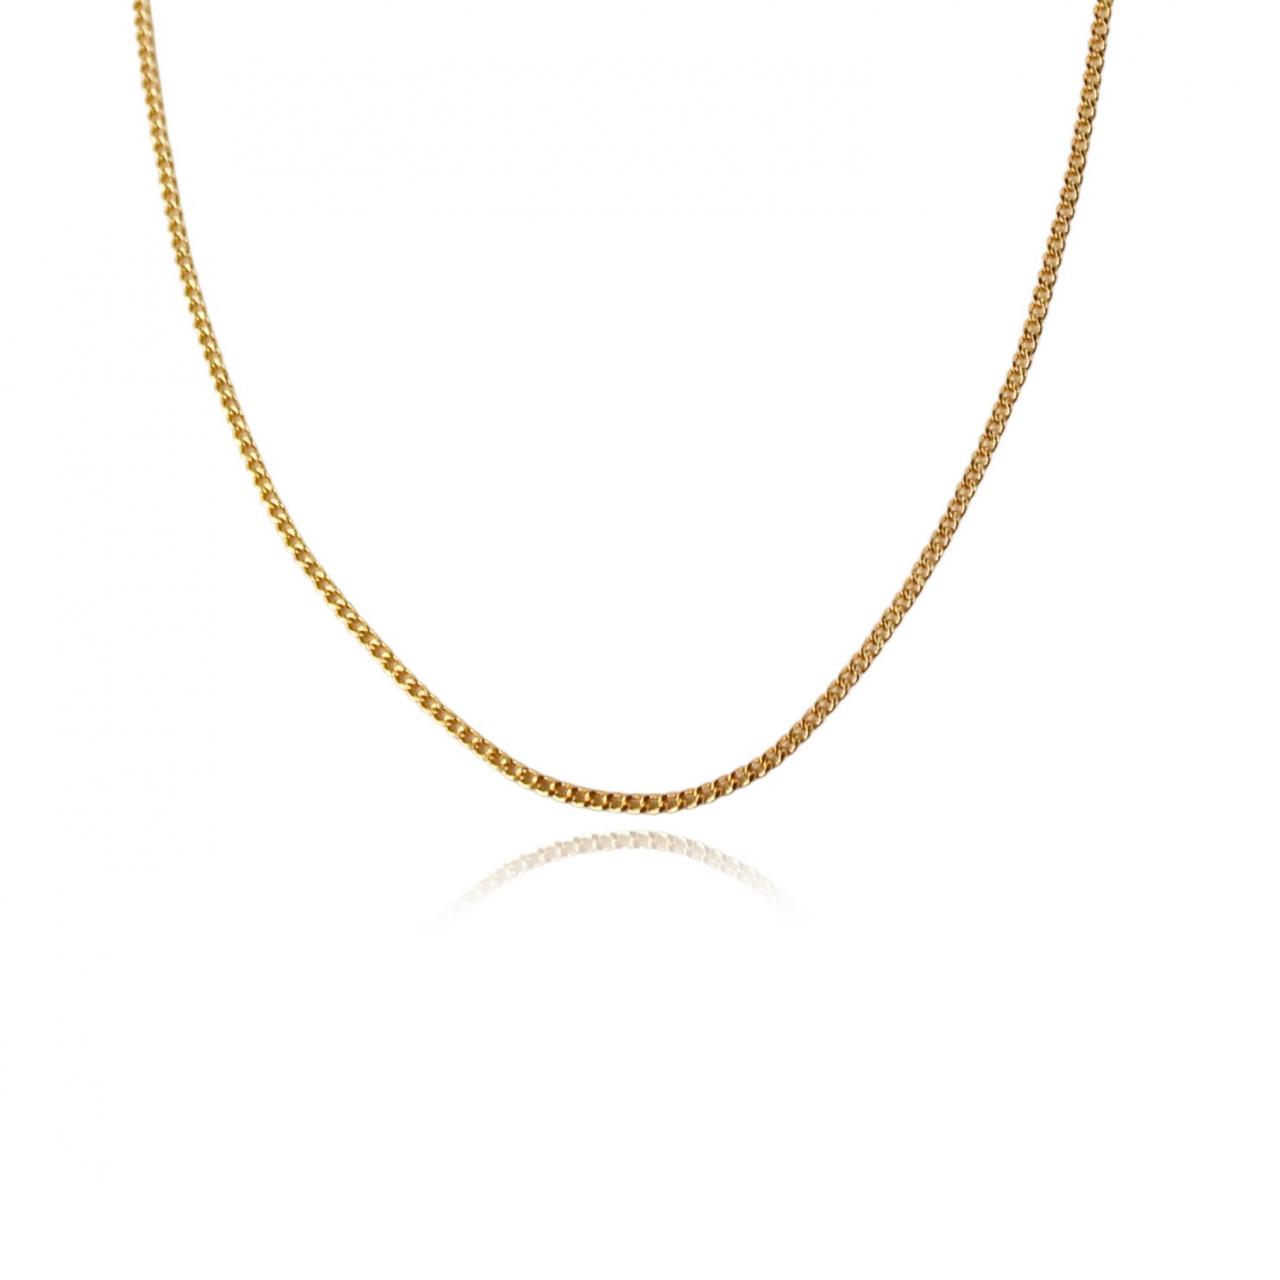 Sensitive Skin Jewelry: Hypoallergenic Necklace For Girls Or Women, High Quality Gold Plated Metal Necklace Mm17